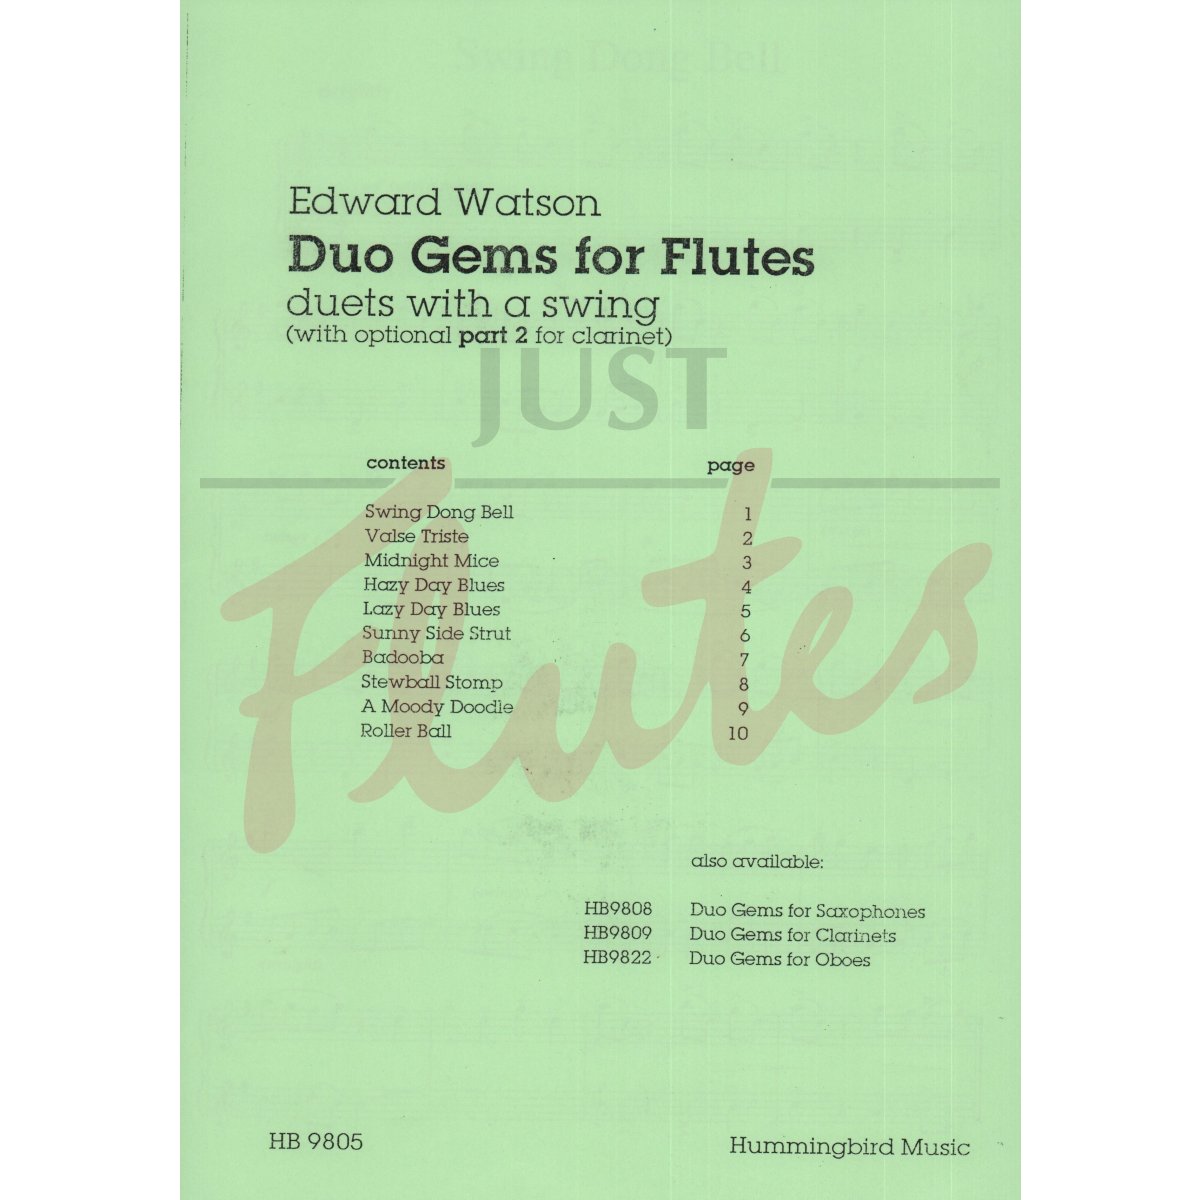 Duo Gems (Duets With a Swing) for Two Flutes